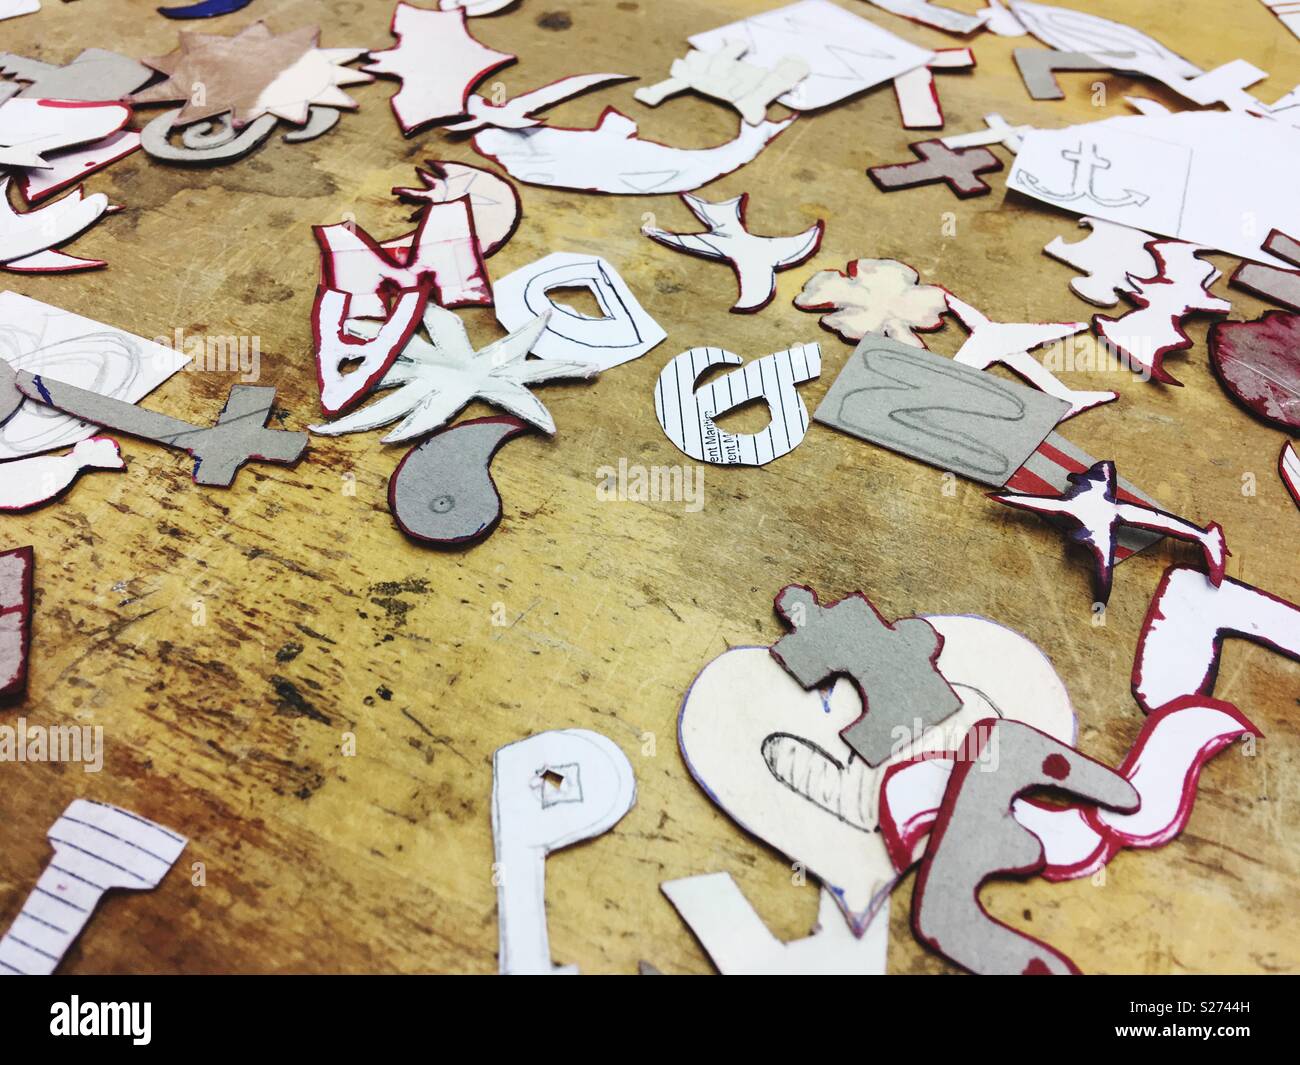 Paper shapes and forms used as templates for goldsmith or jeweller apprentices on a wooden surface Stock Photo